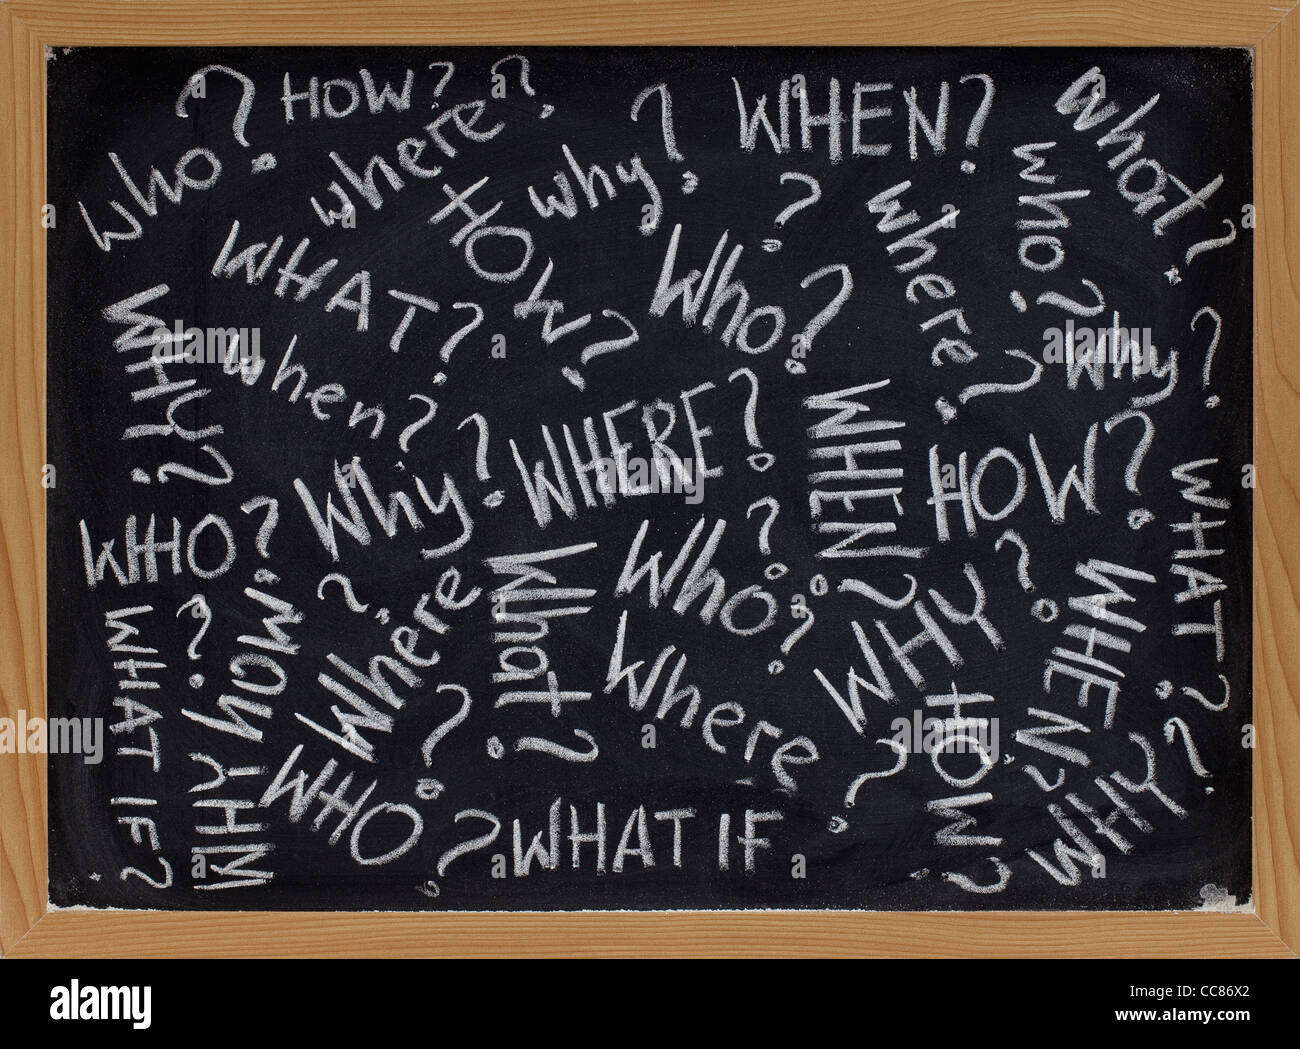 who, what, why, how, where, when, what if questions - white chalk handwriting on blackboard Stock Photo